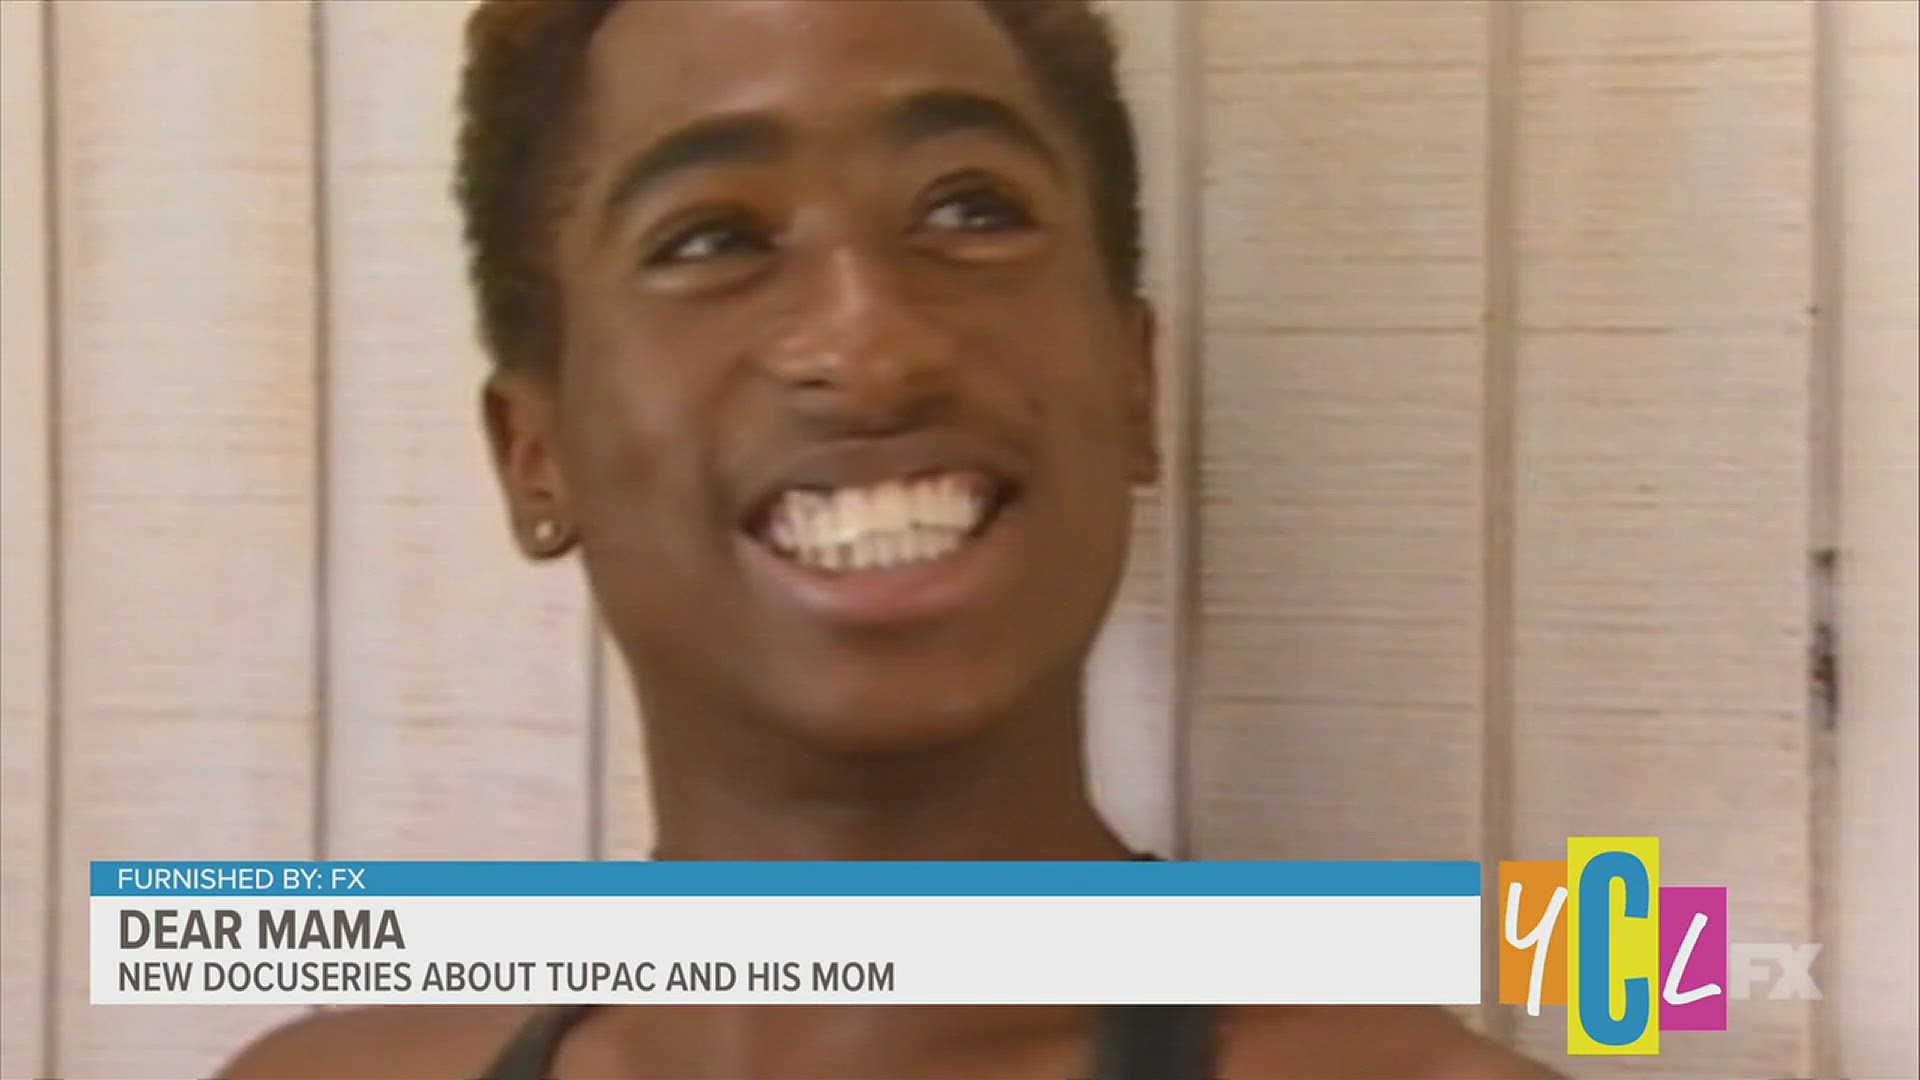 Dear Mama is a new five-part docuseries about legendary rapper Tupac Shakur and his mother Afeni Shakur, a feminist leader in the black movement of the 70s.